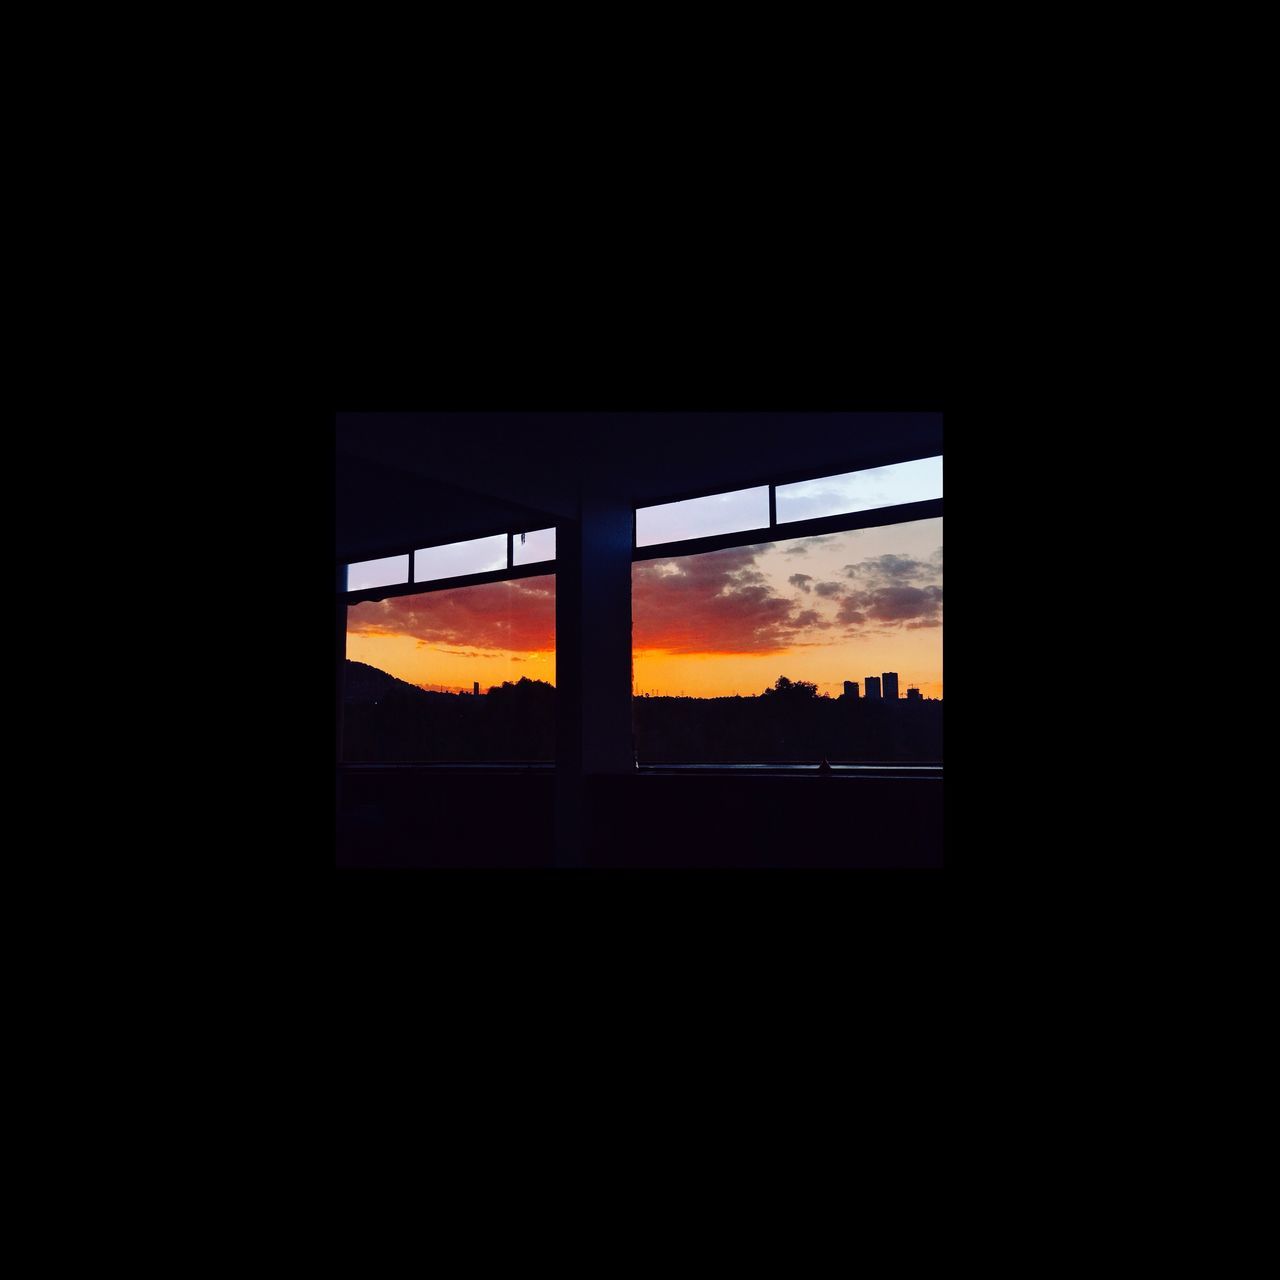 sunset, silhouette, window, sky, copy space, built structure, architecture, indoors, nature, no people, beauty in nature, day